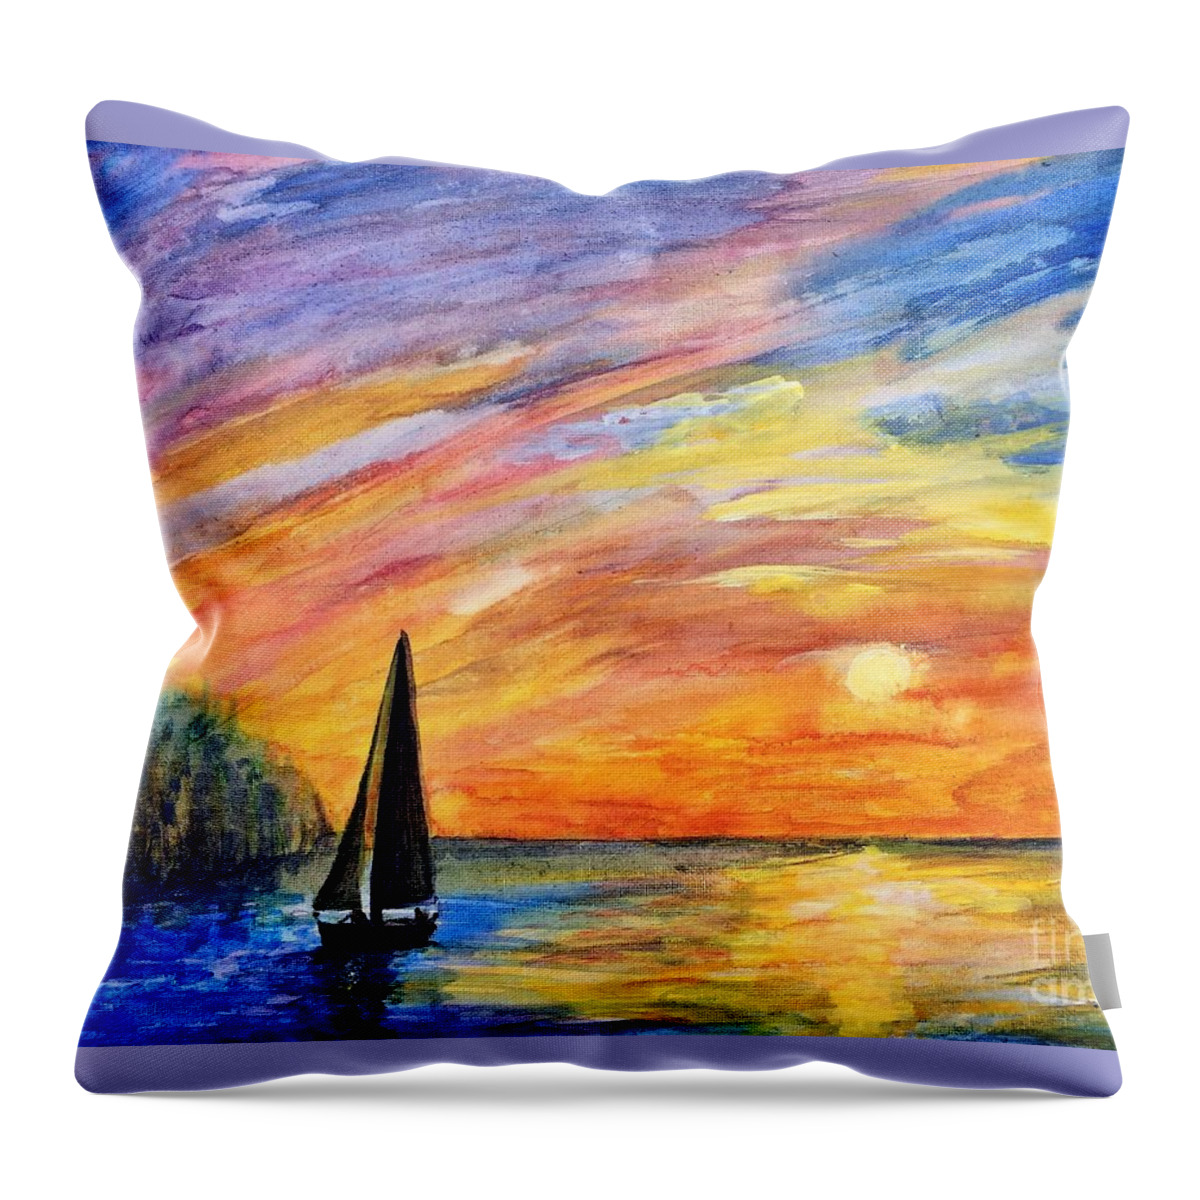 Sunset Throw Pillow featuring the painting Sunset Sail by Deb Stroh-Larson